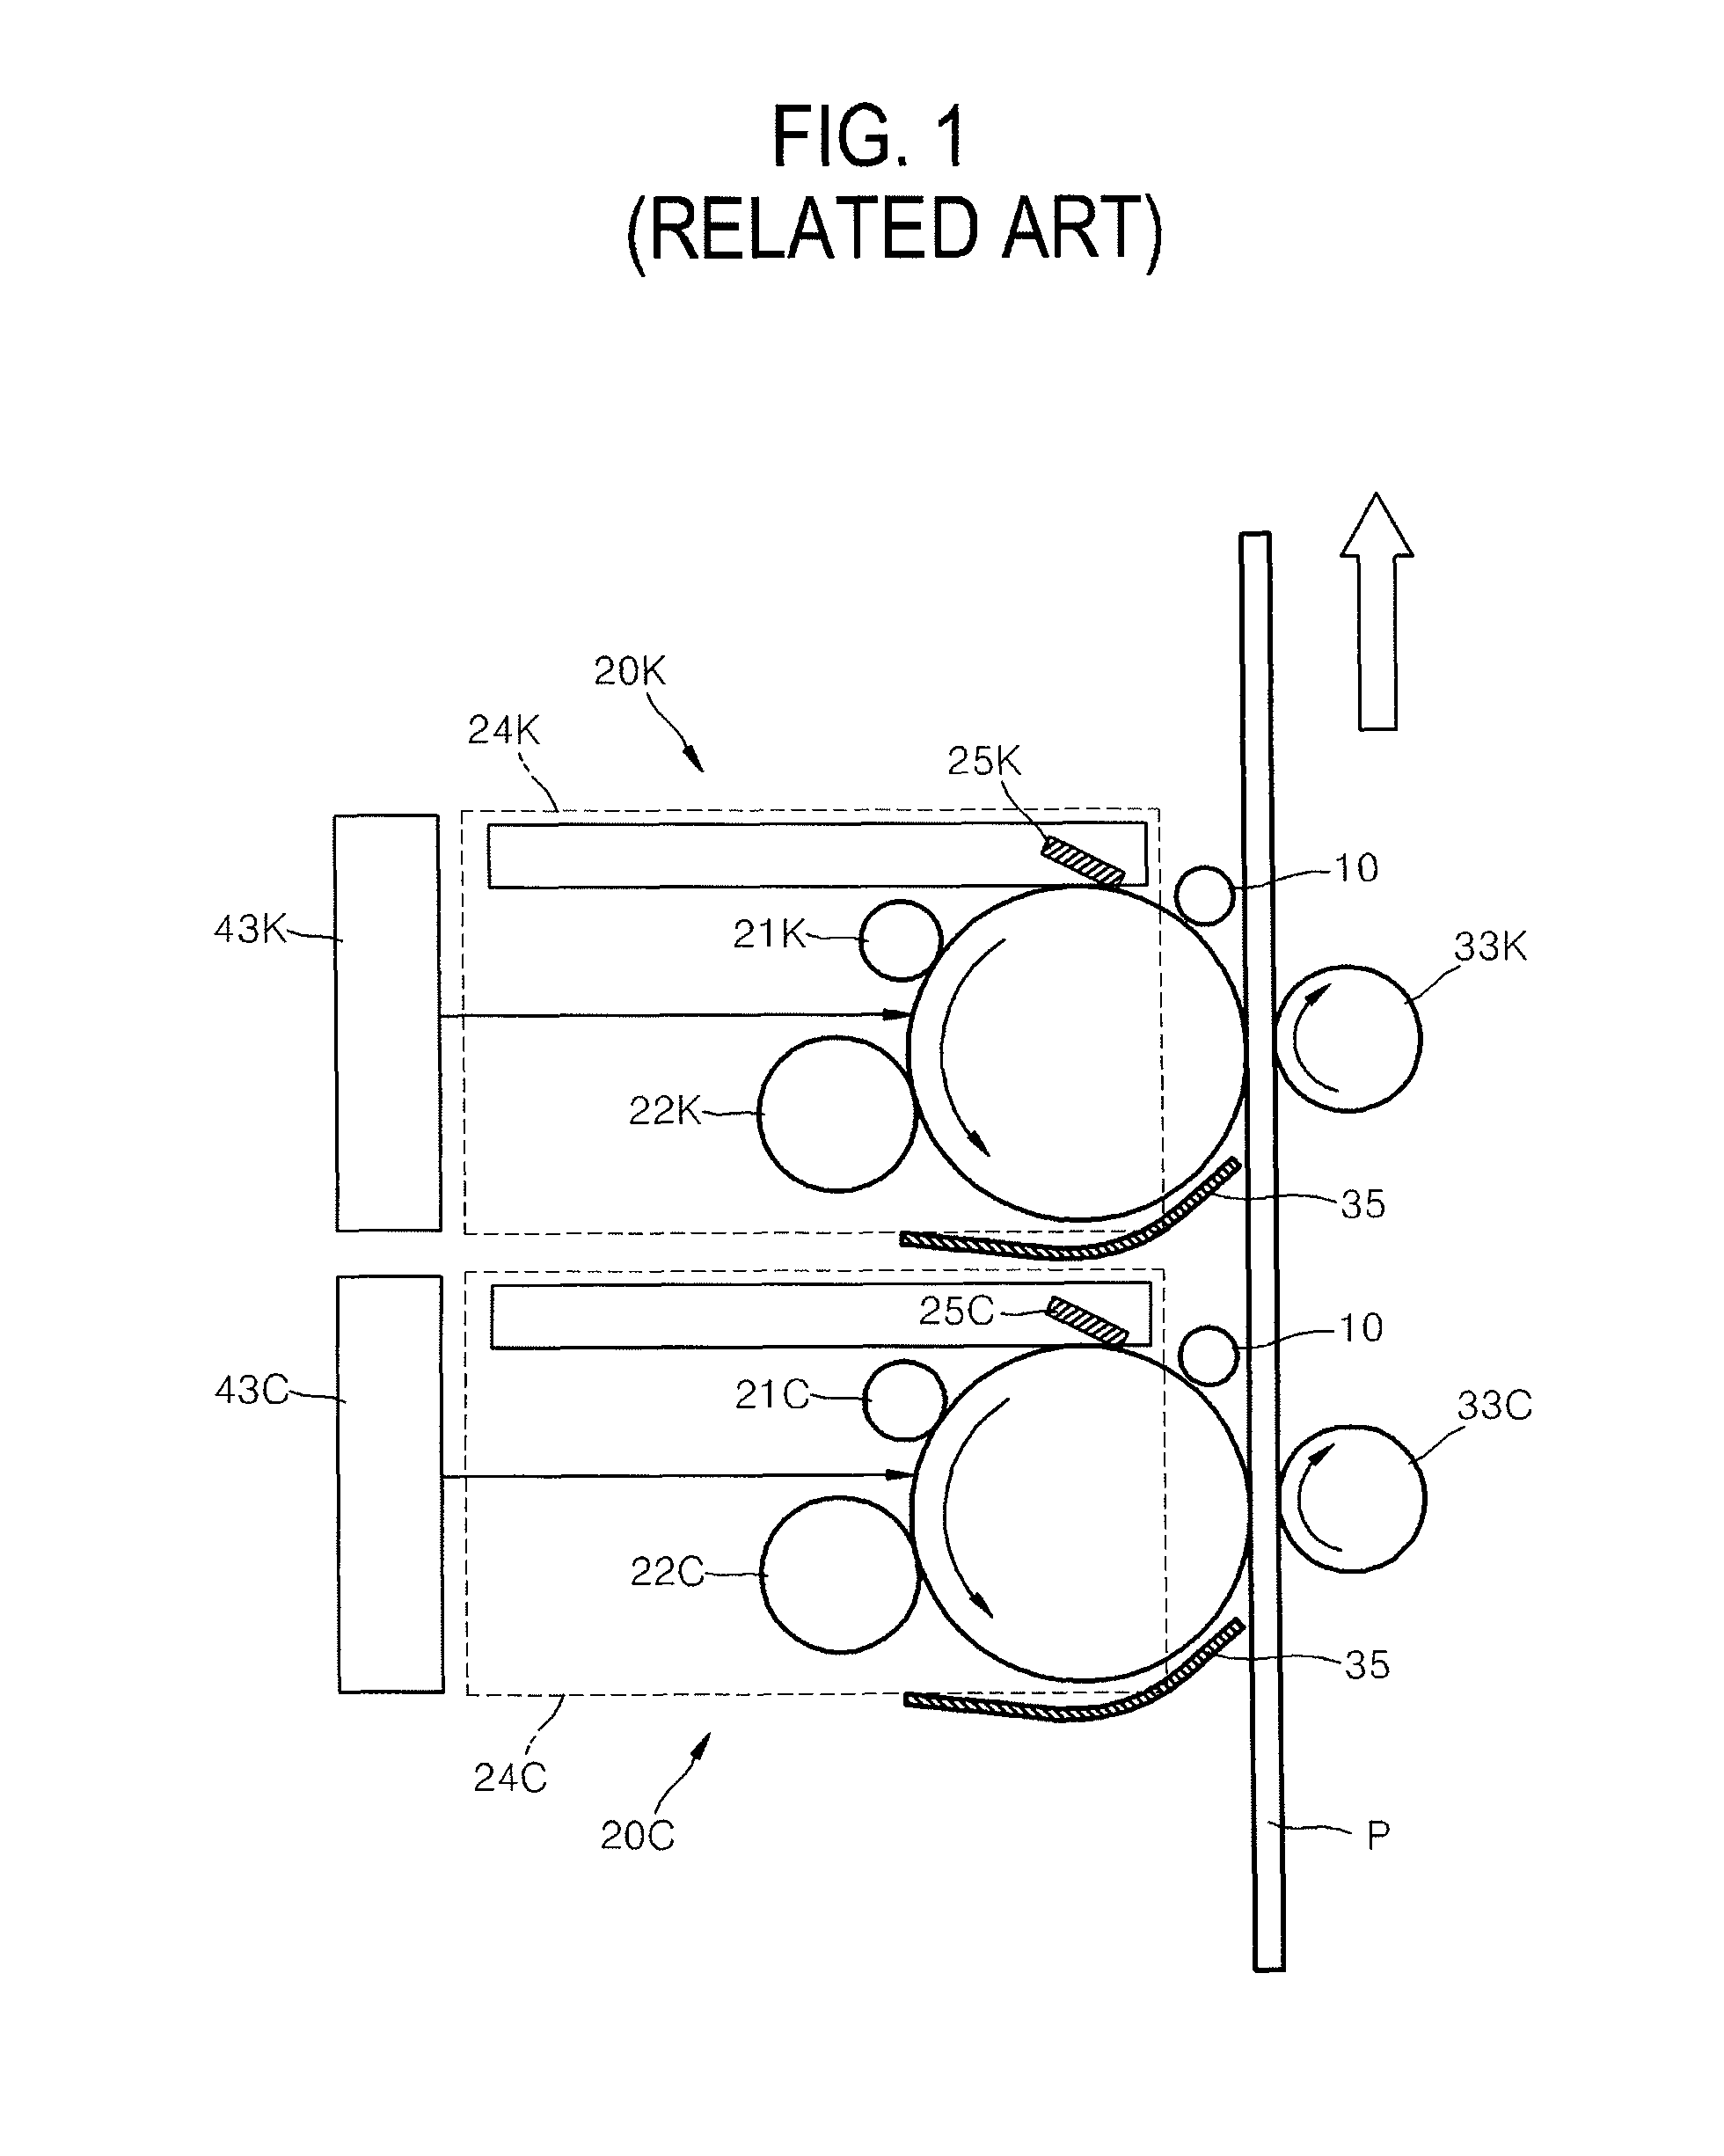 Image forming apparatus with a light scanning lamp blocking device, operating method thereof and a cartridge usable with the image forming apparatus